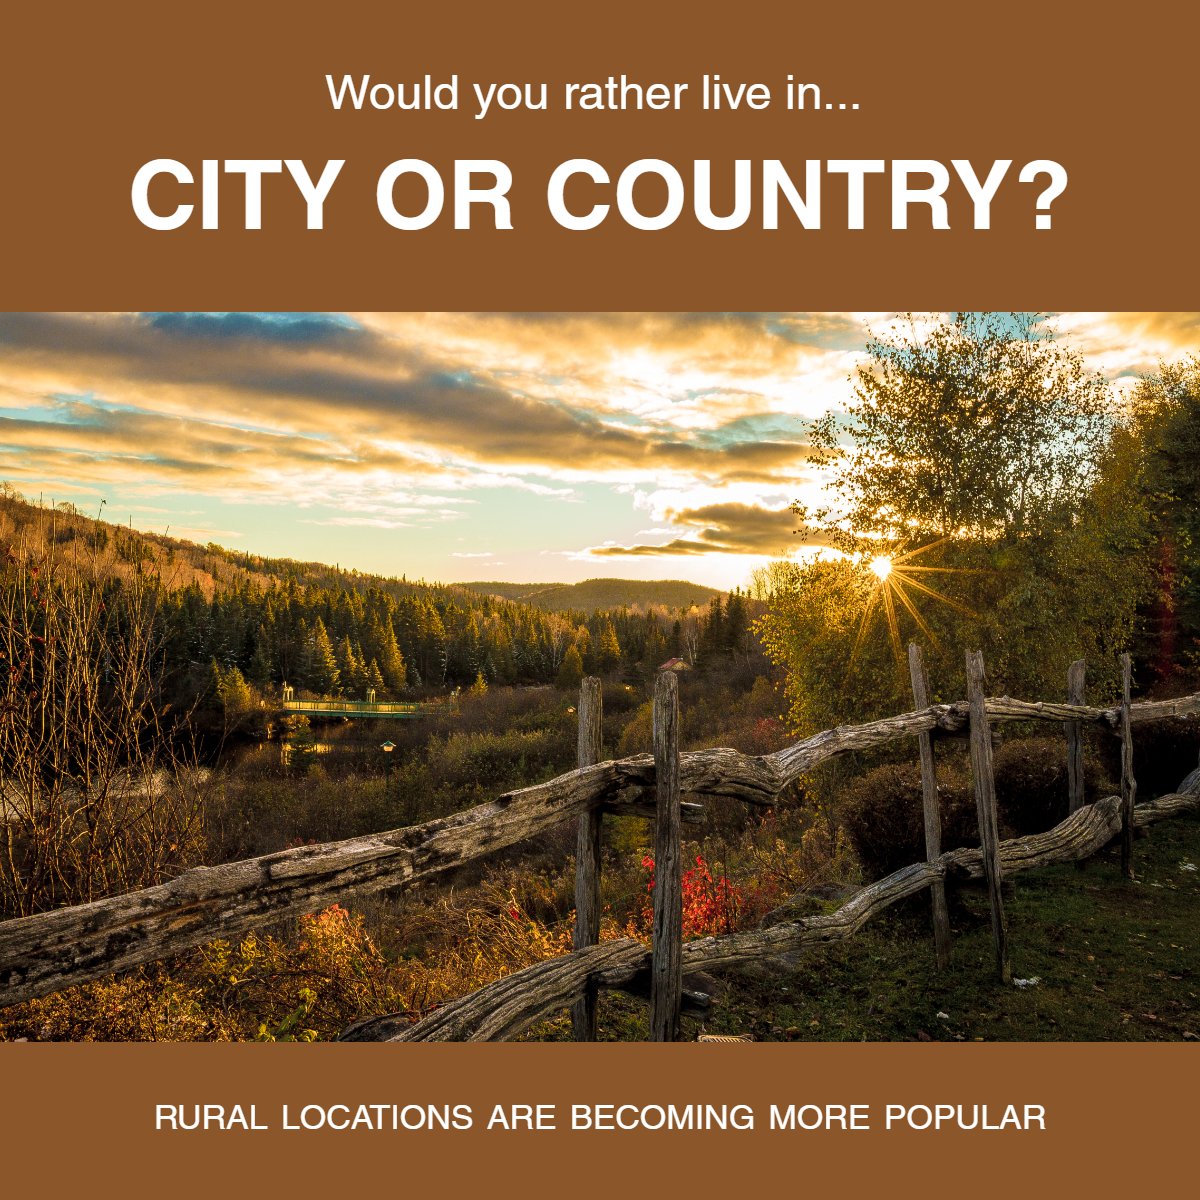 Would you rather live in the city or country? 🏙️🌄

#wouldyourather #cityorcountry #citylights #realestatequestion #realestate
 #luxuryrealestate #buyer #seller #realestate #mortgageloan #moving #interestrates